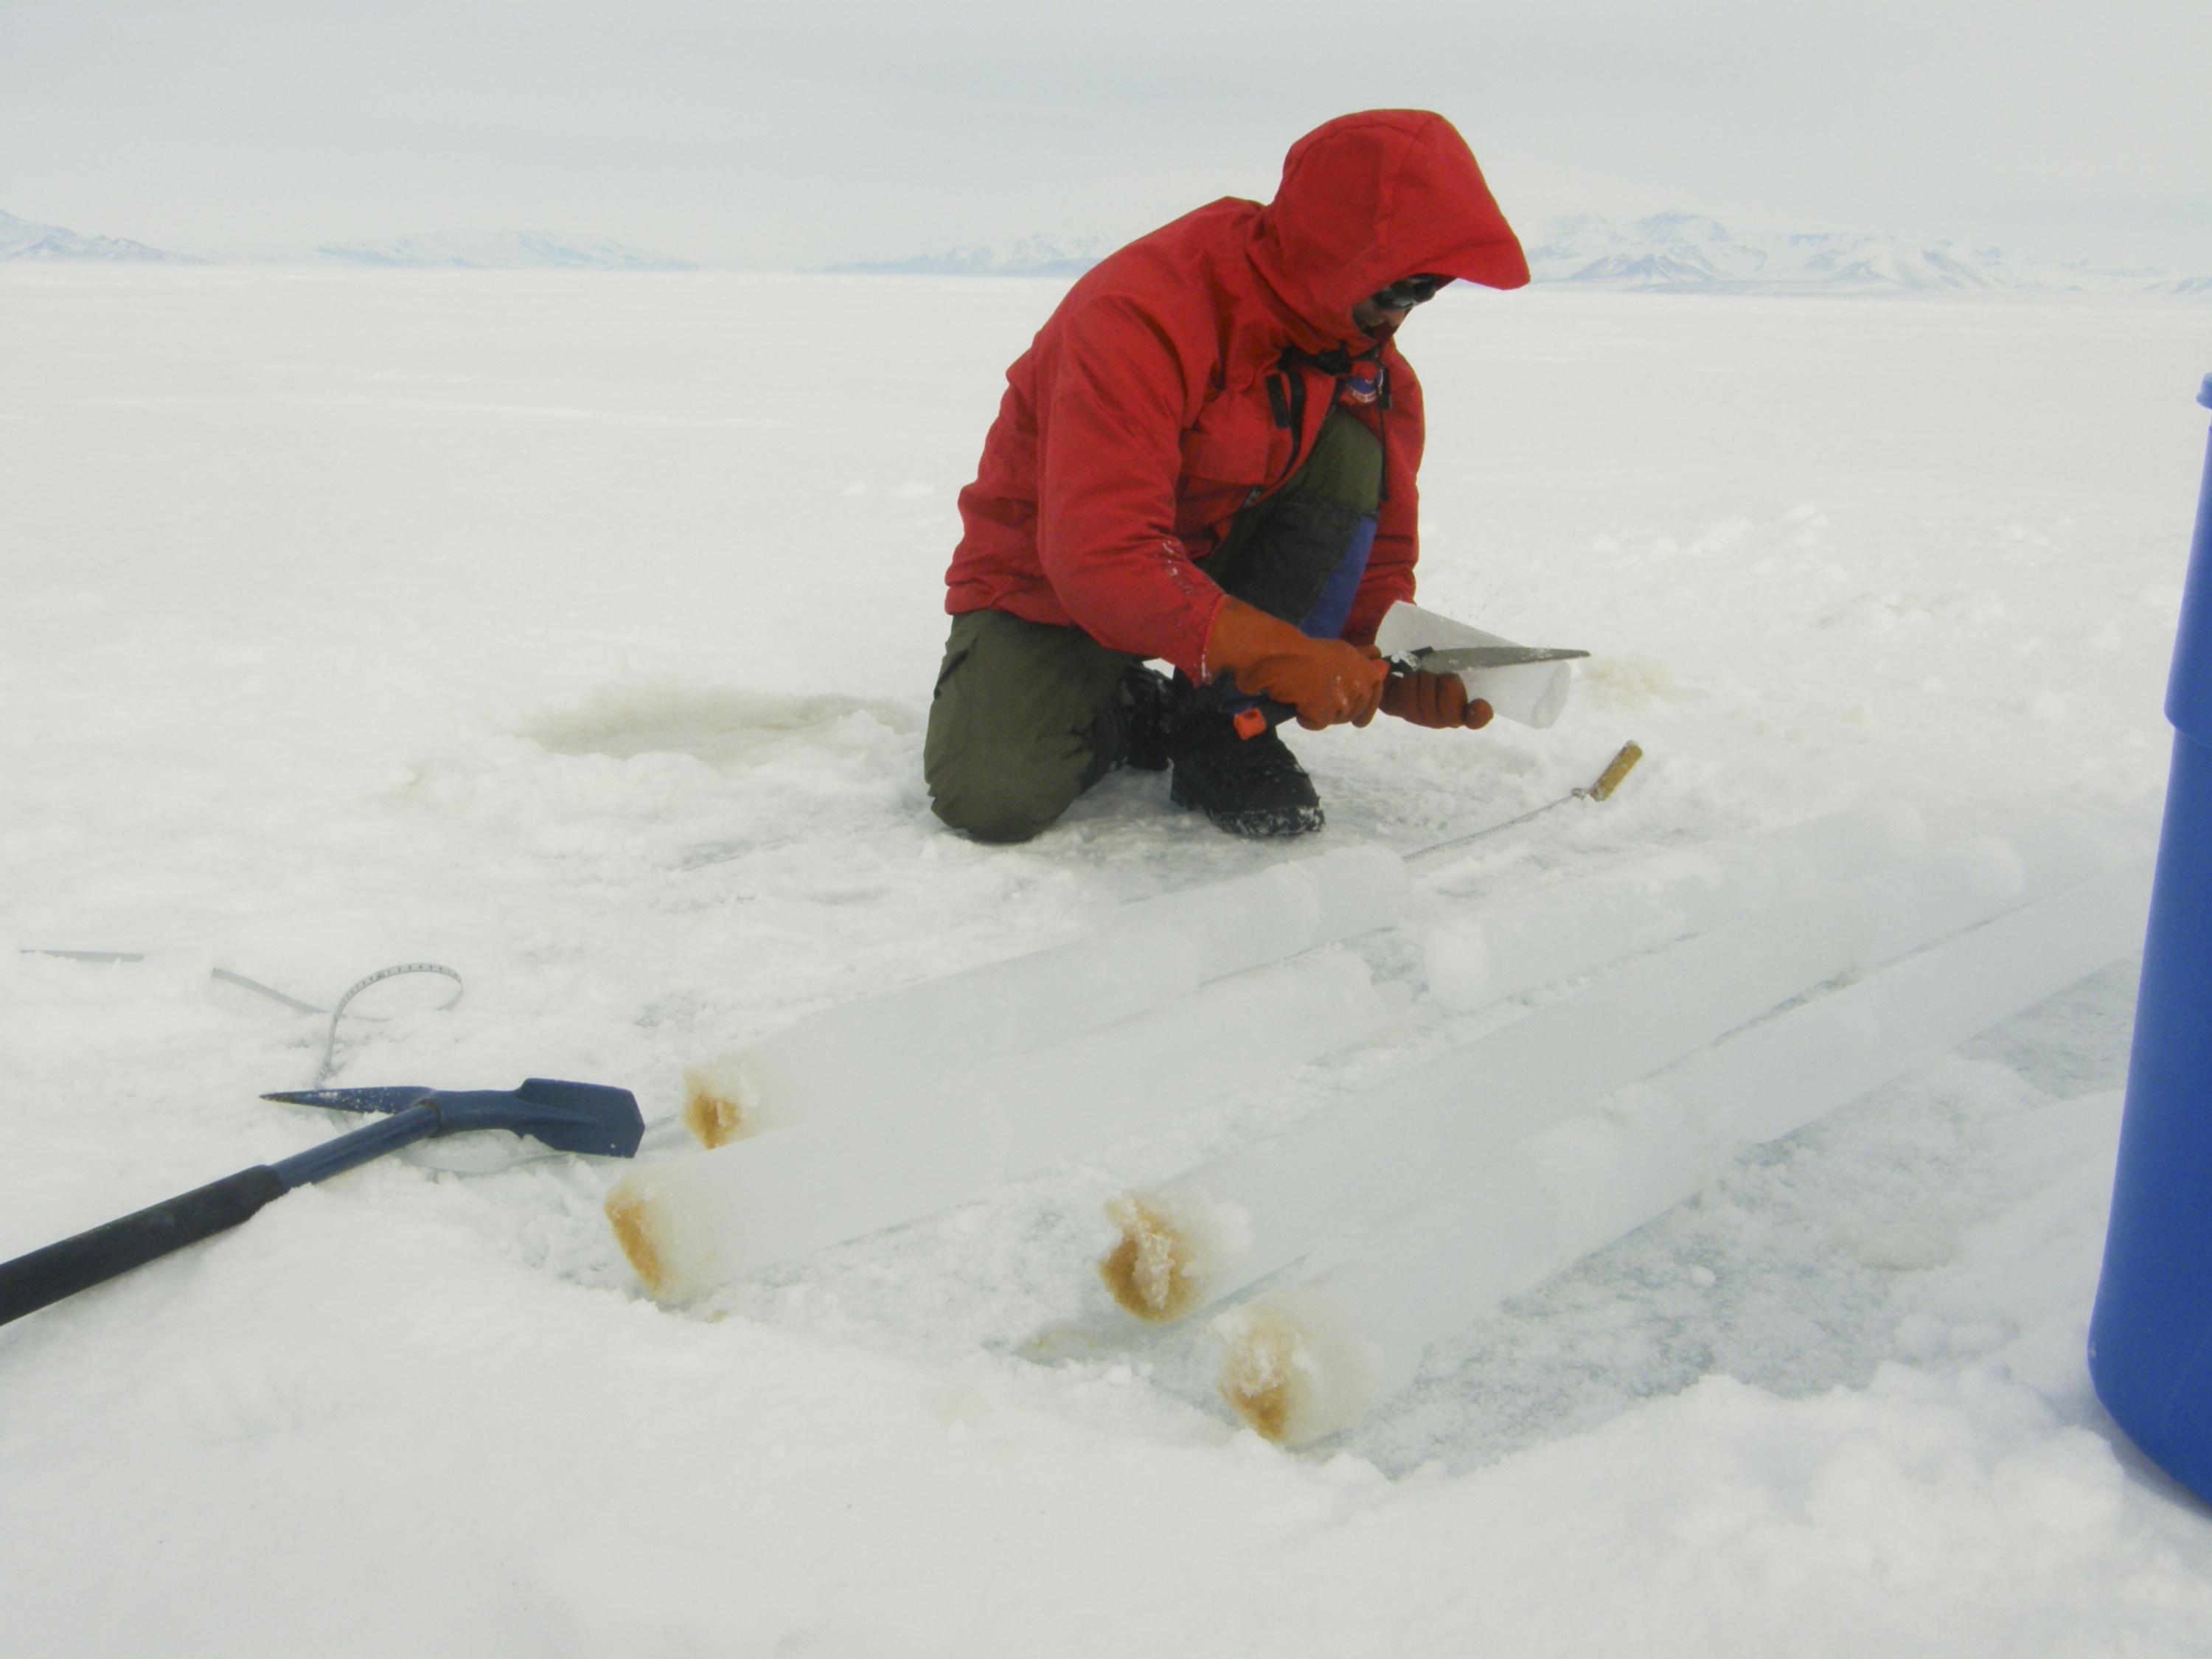 Jeff Bowman from Scripps Institution of Oceanography takes ice core samples on Antarctica. As OAST's deputy principal investigator, he will focus his research on conditions conducive to life in Earth's under-ice oceans to search for signs of it elsewhere in our solar system. Credit: Jeff Bowman / Scripps Institution of Oceanography